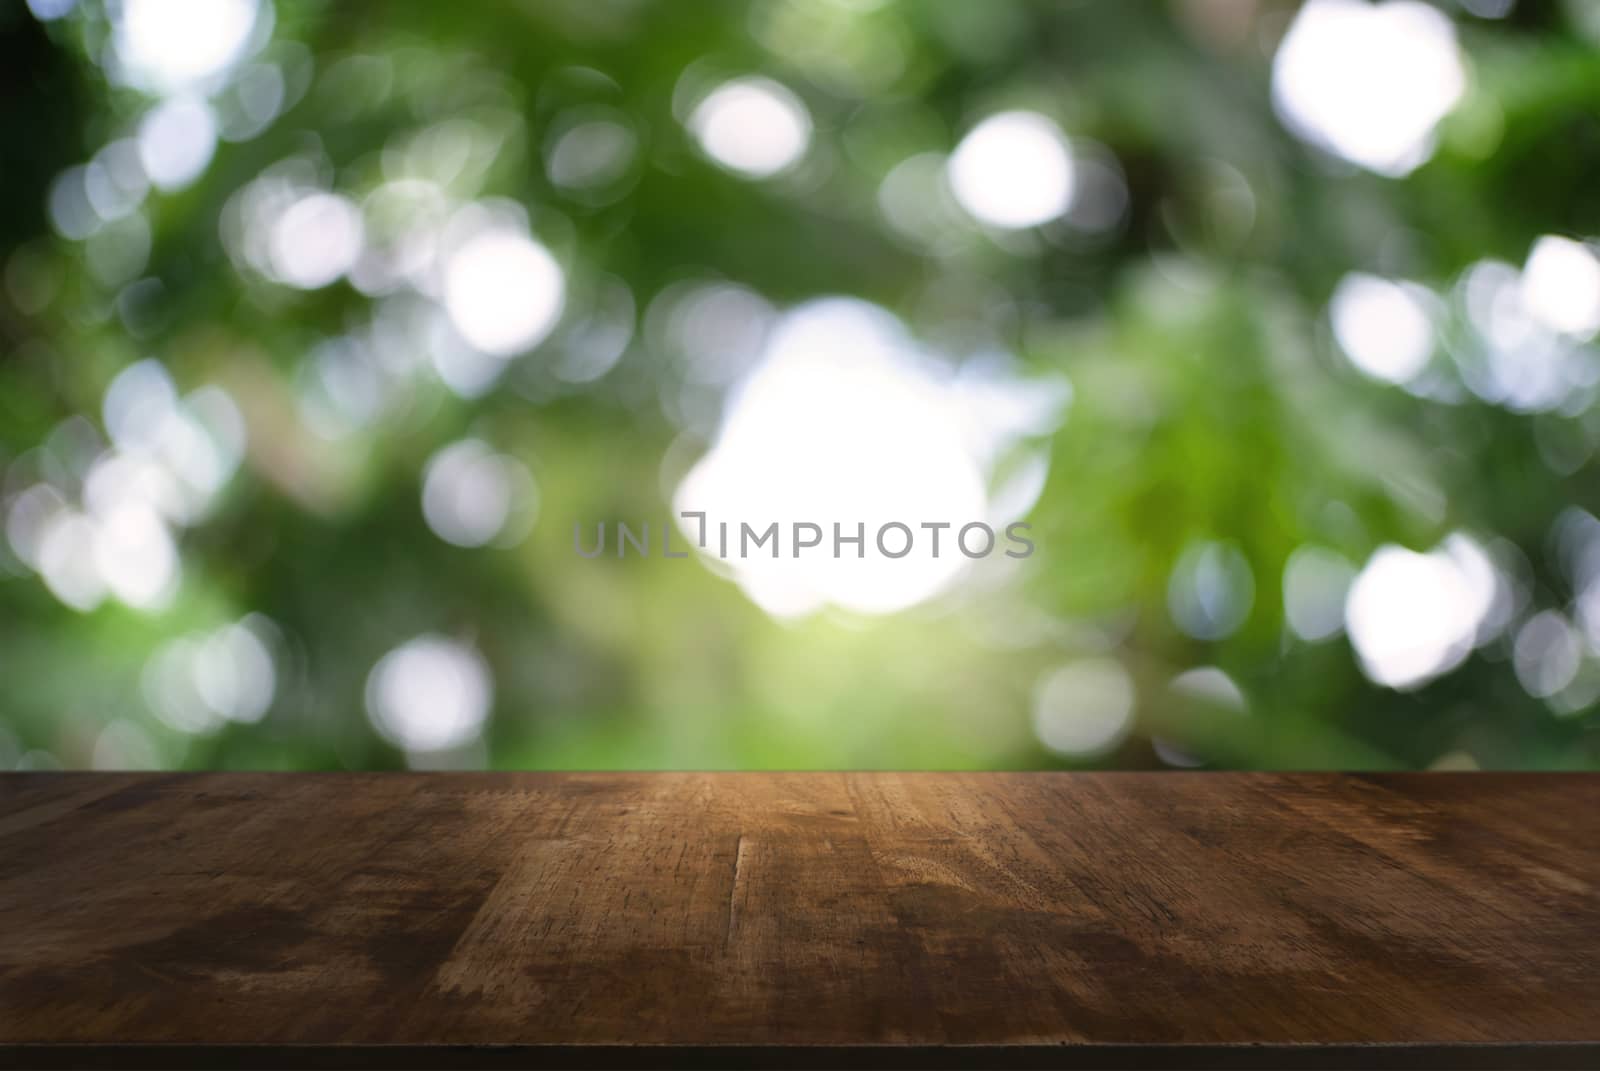 Image of dark wooden table in front of abstract blurred backgrou by peandben